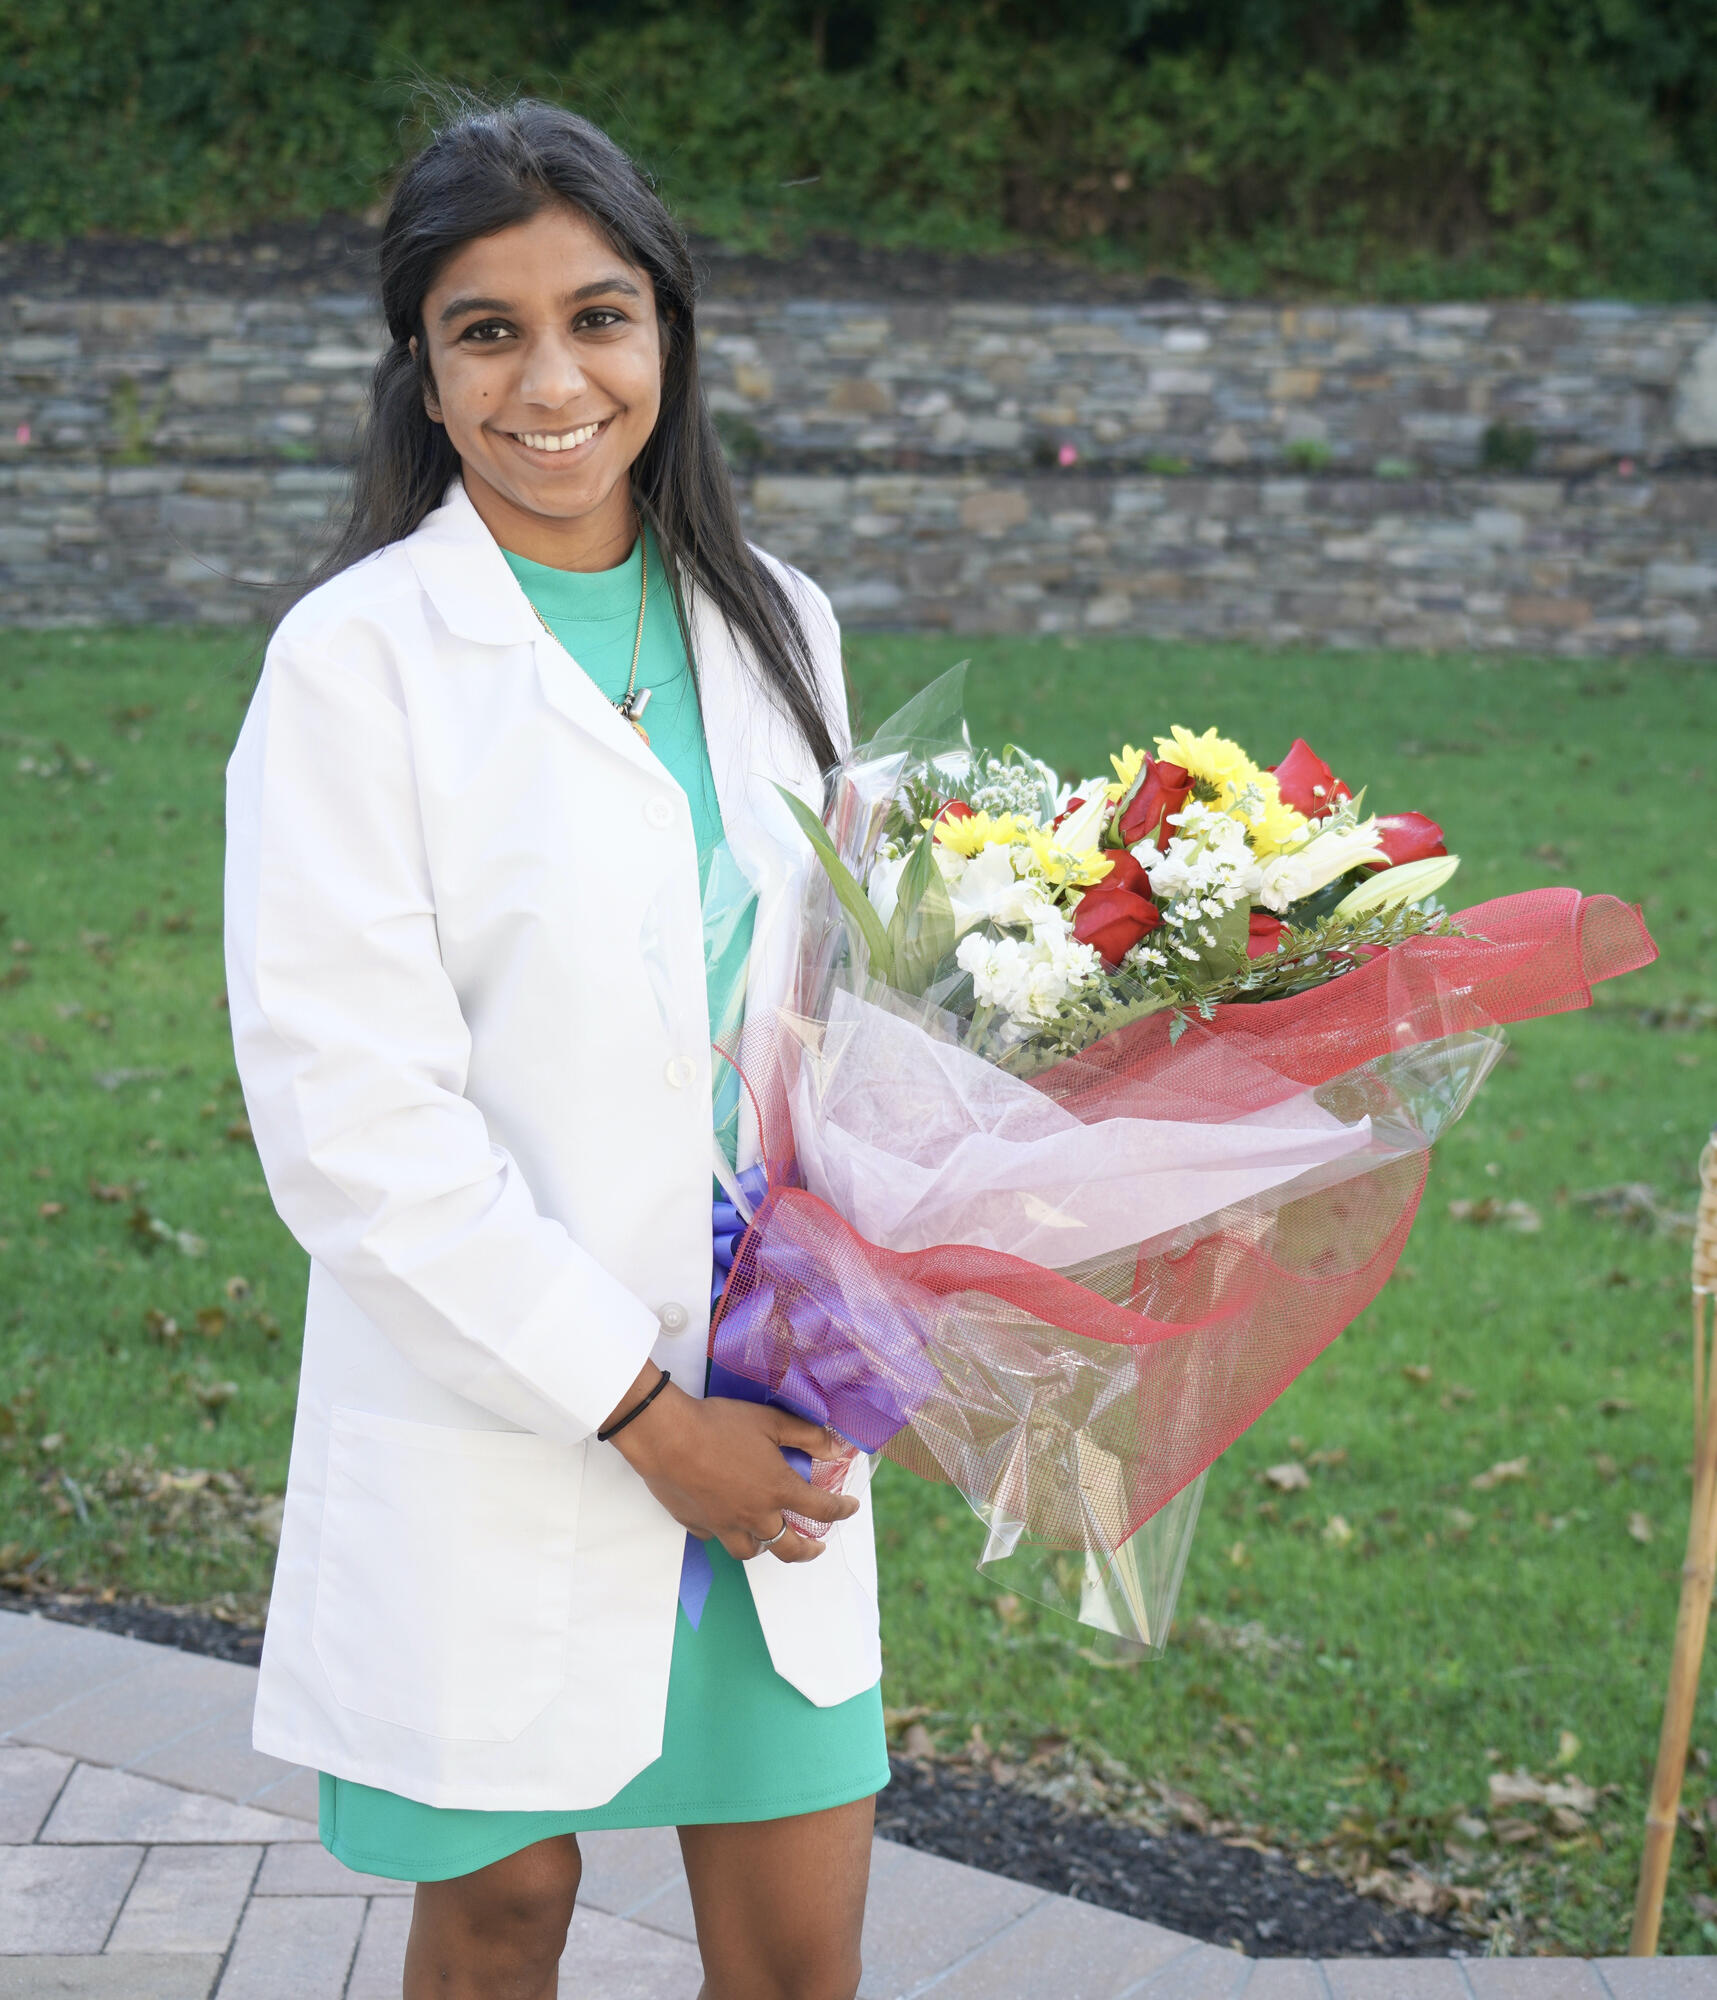 Sapna Nath, DMD24, celebrates her virtual White Coat Ceremony at home with family and friends.